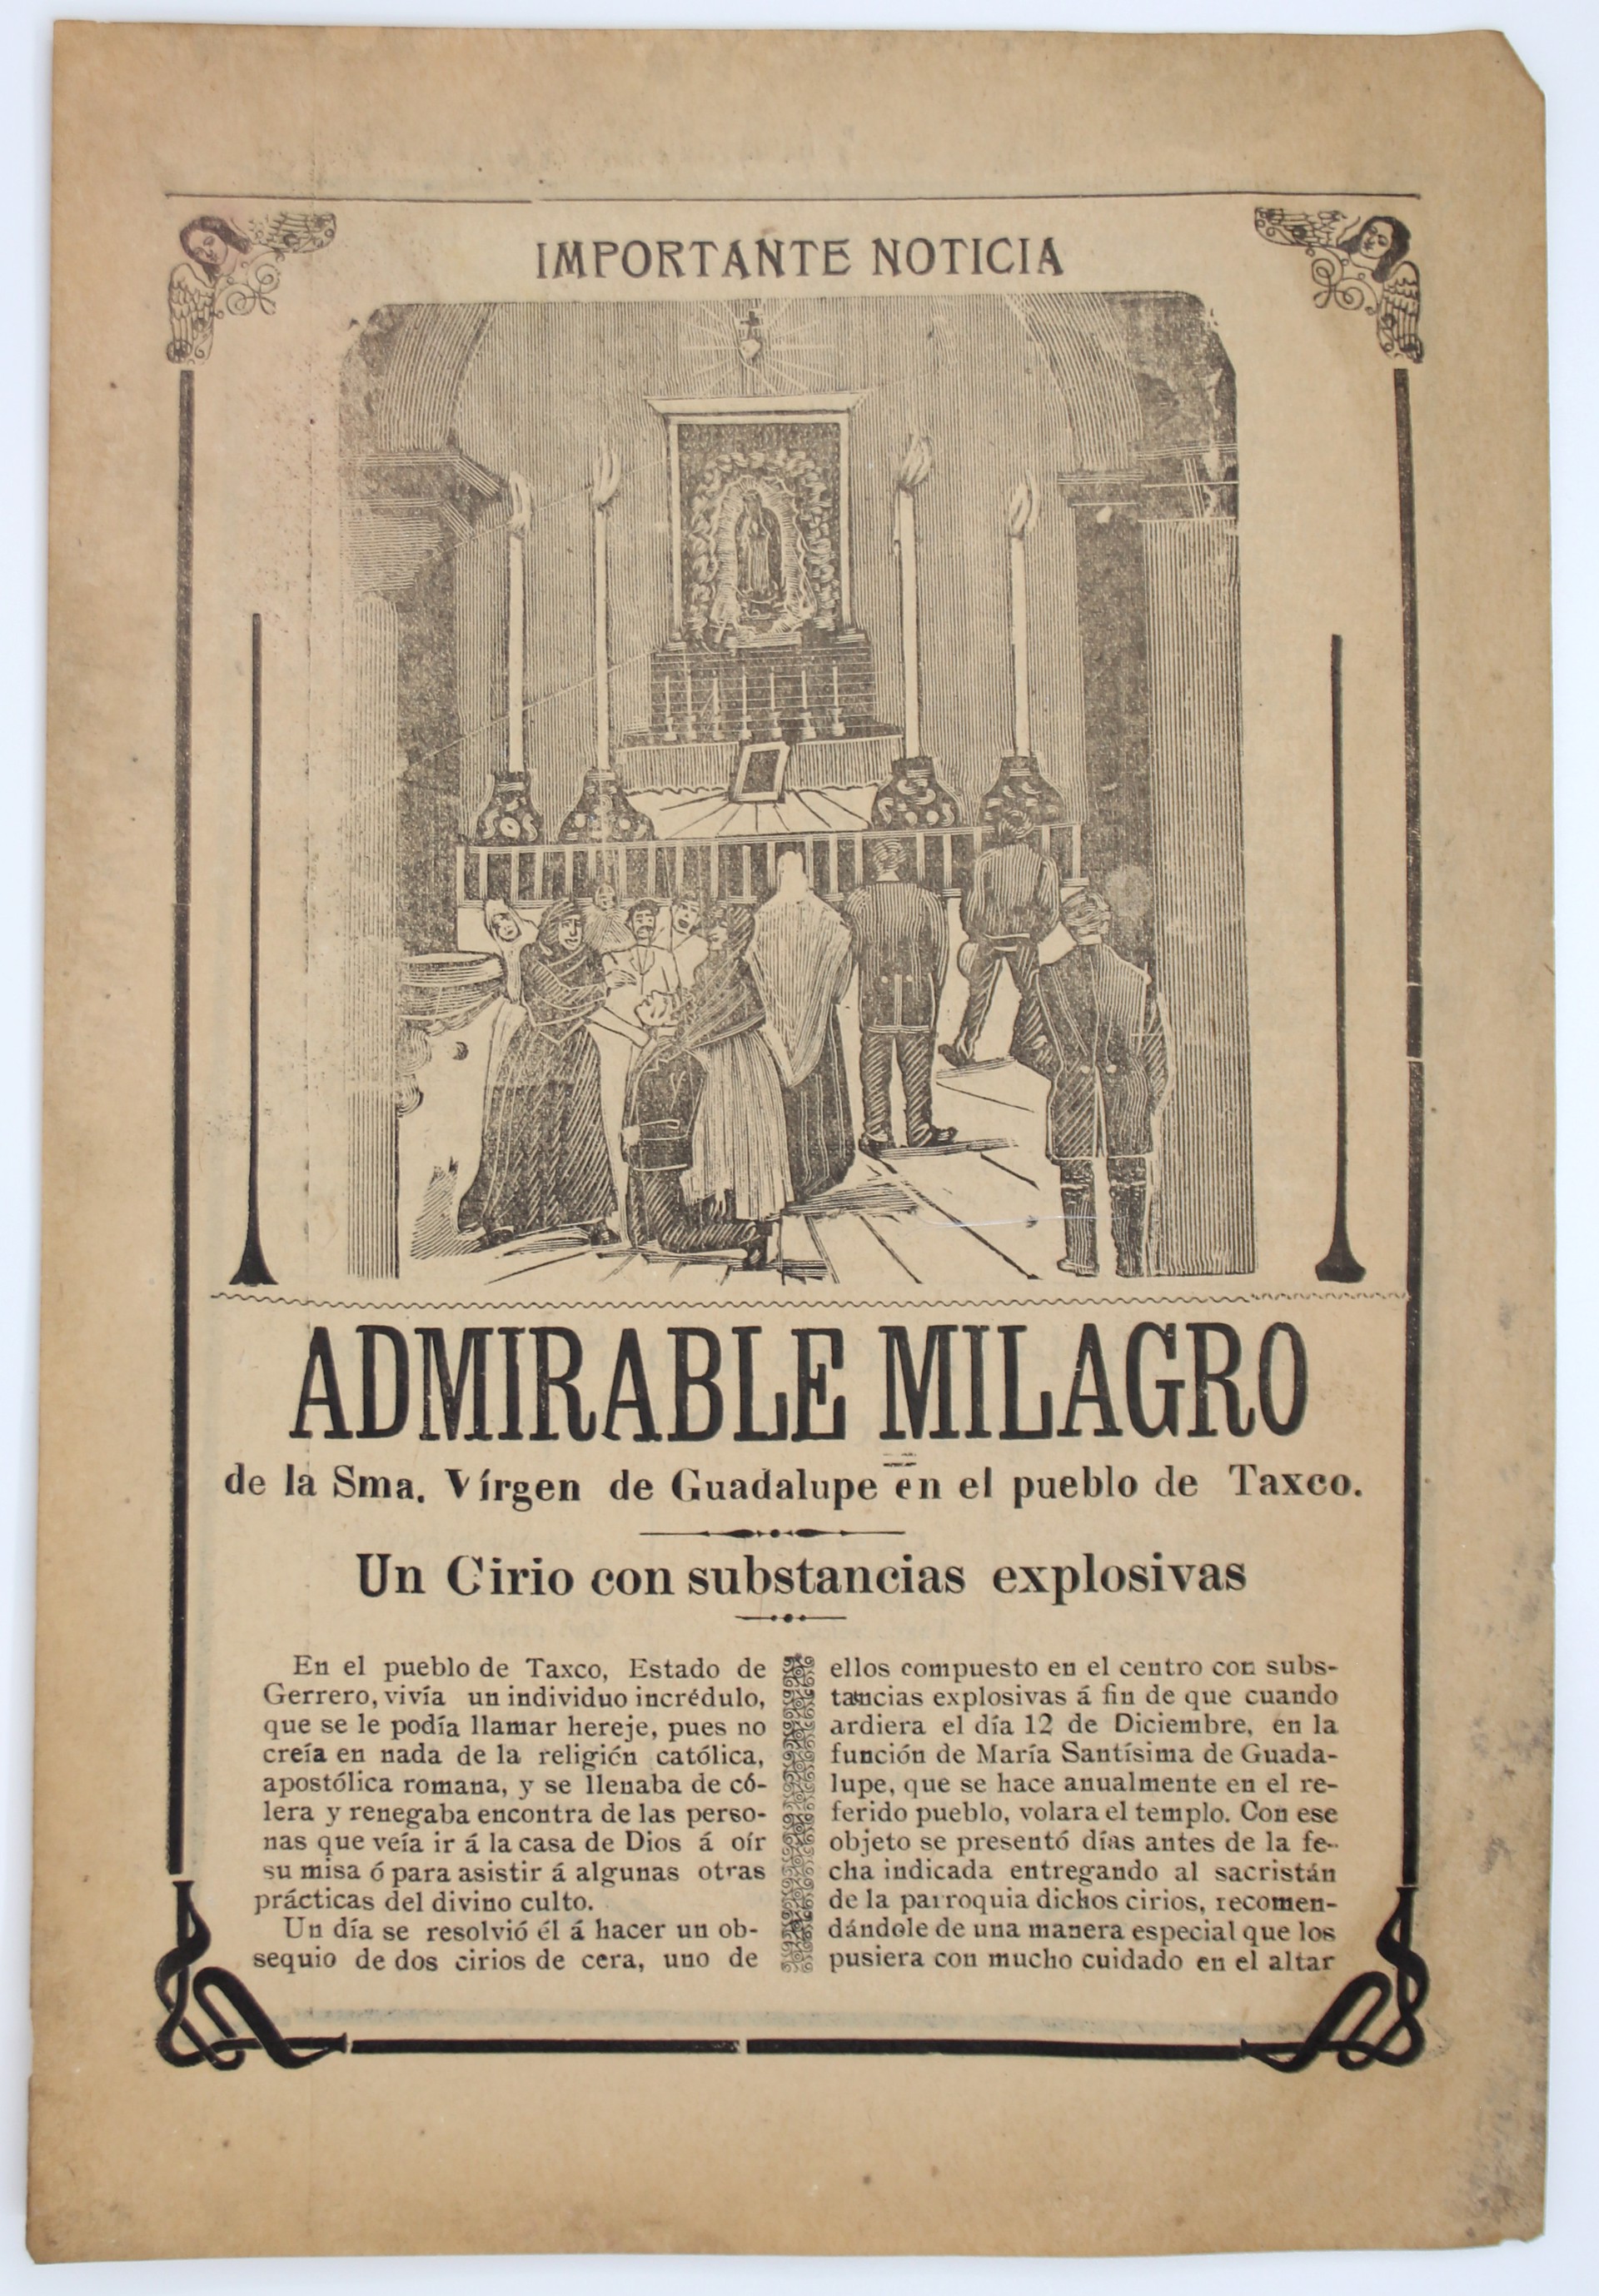 Admirable Milagro by José Guadalupe Posada